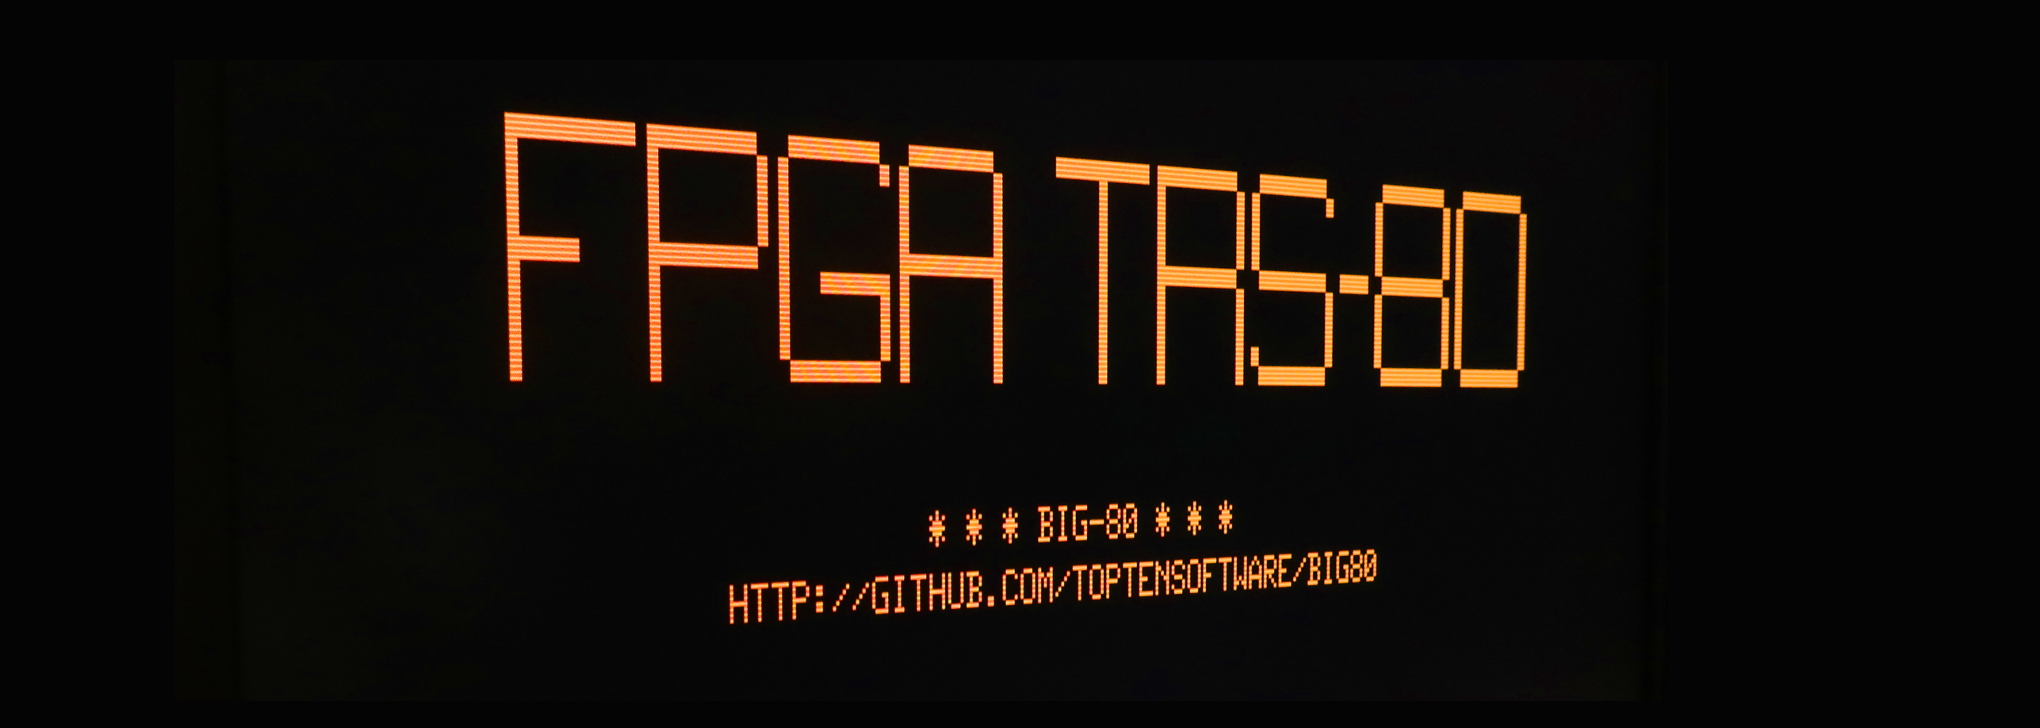 TRS-80 in an FPGA - Finishing Touches